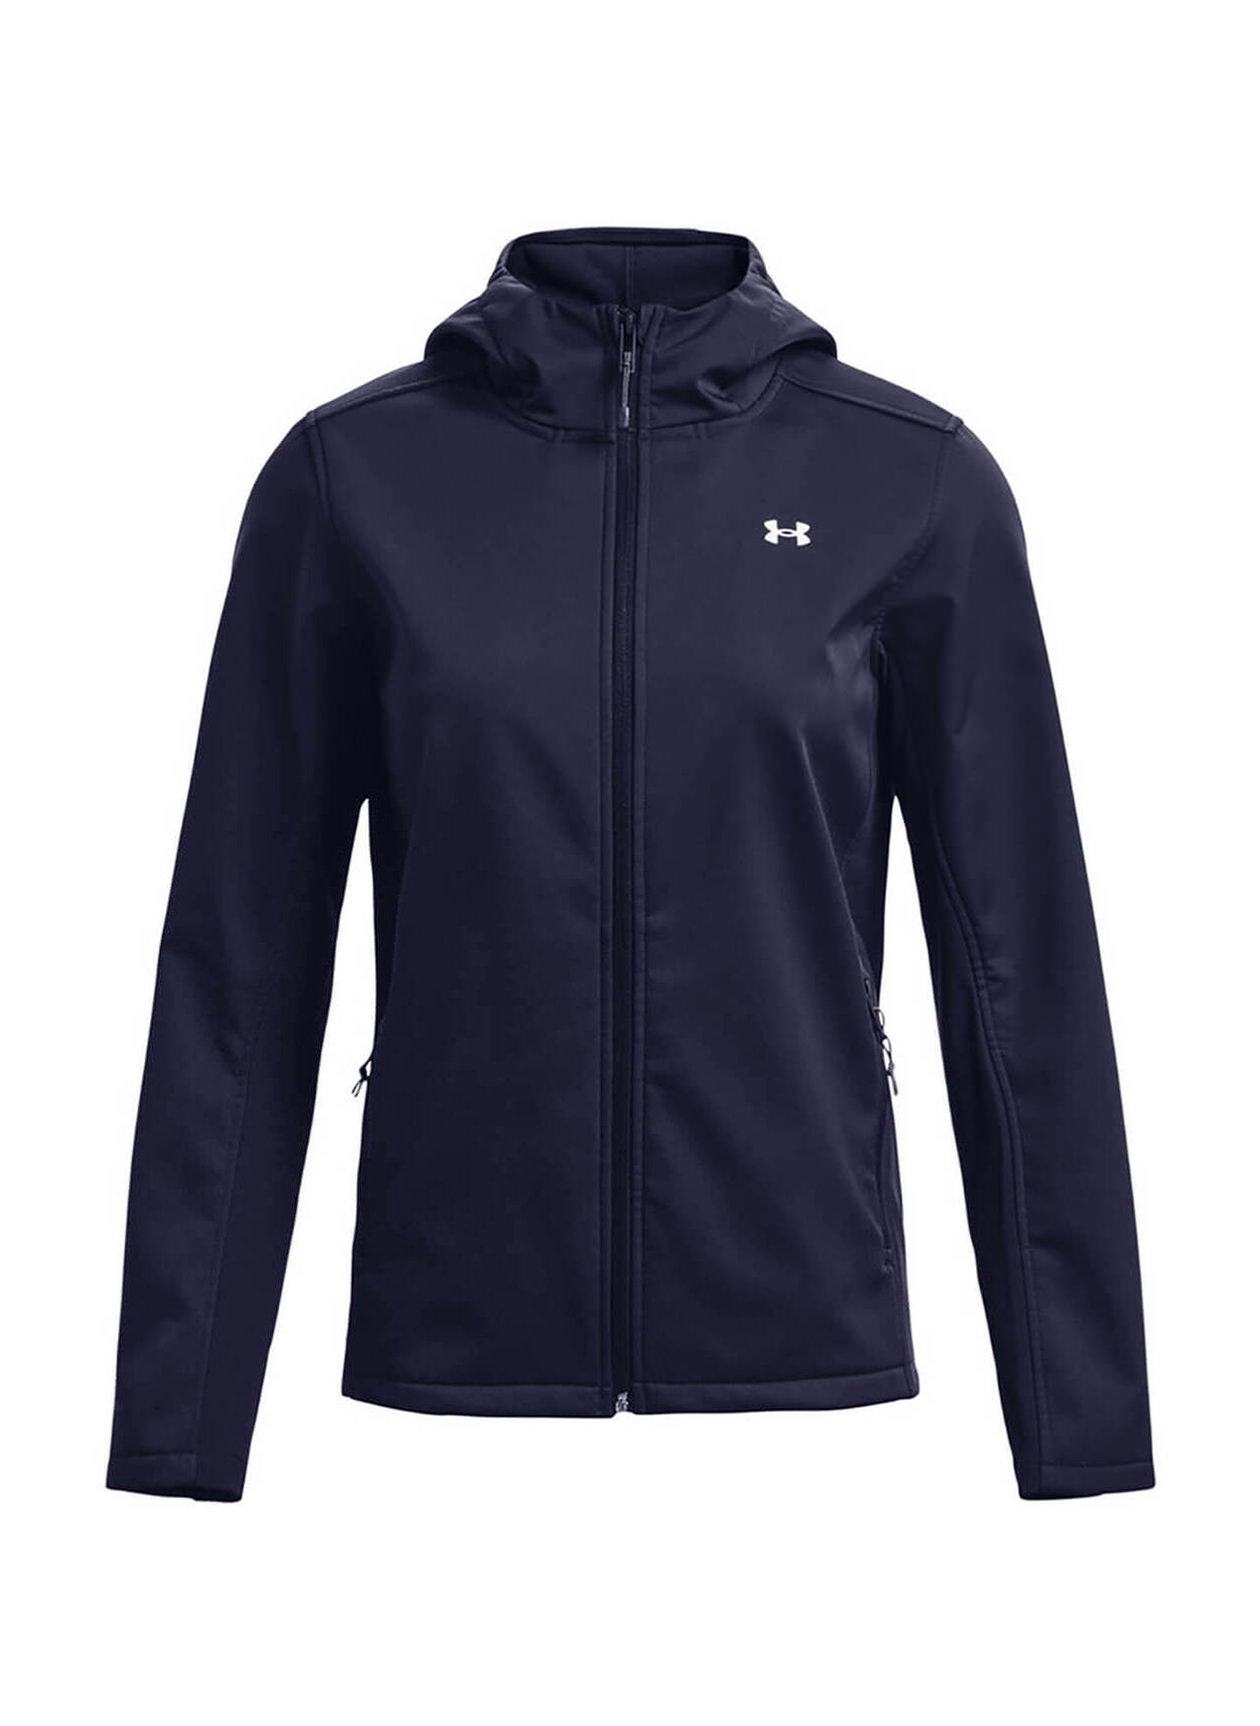 Under Armour Storm ColdGear Infrared Shield 2.0 Hooded Jacket for